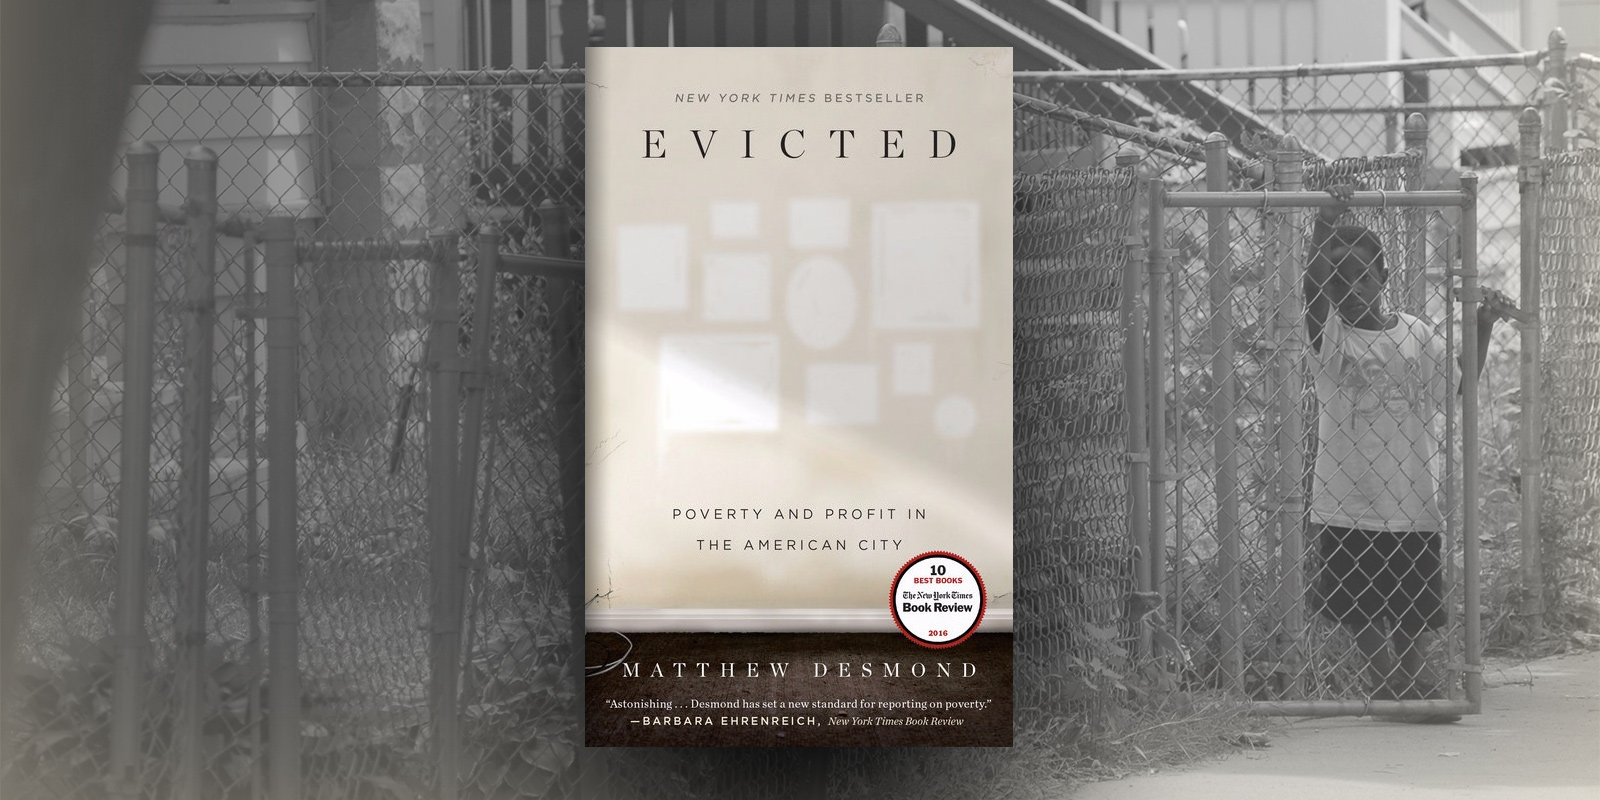 Cover of "Evicted" by Matthew Desmond 